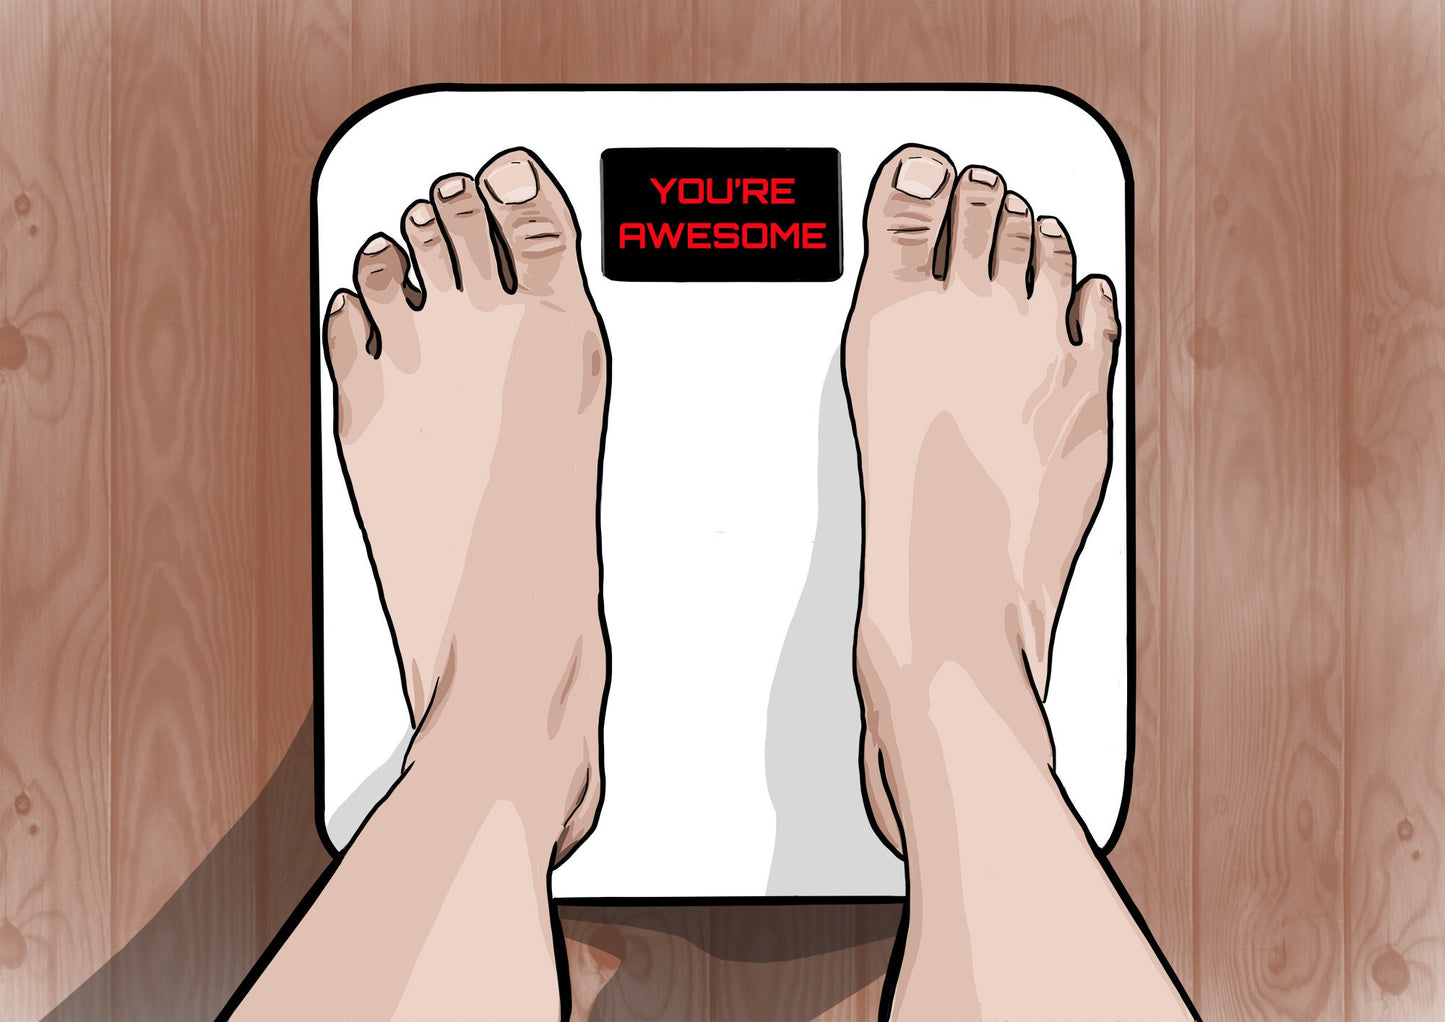 Weight Loss Support and Motivation Greeting Card "You're Awesome" | Diet Success | Personalised Cards | Feet on Scale | Health | Reward